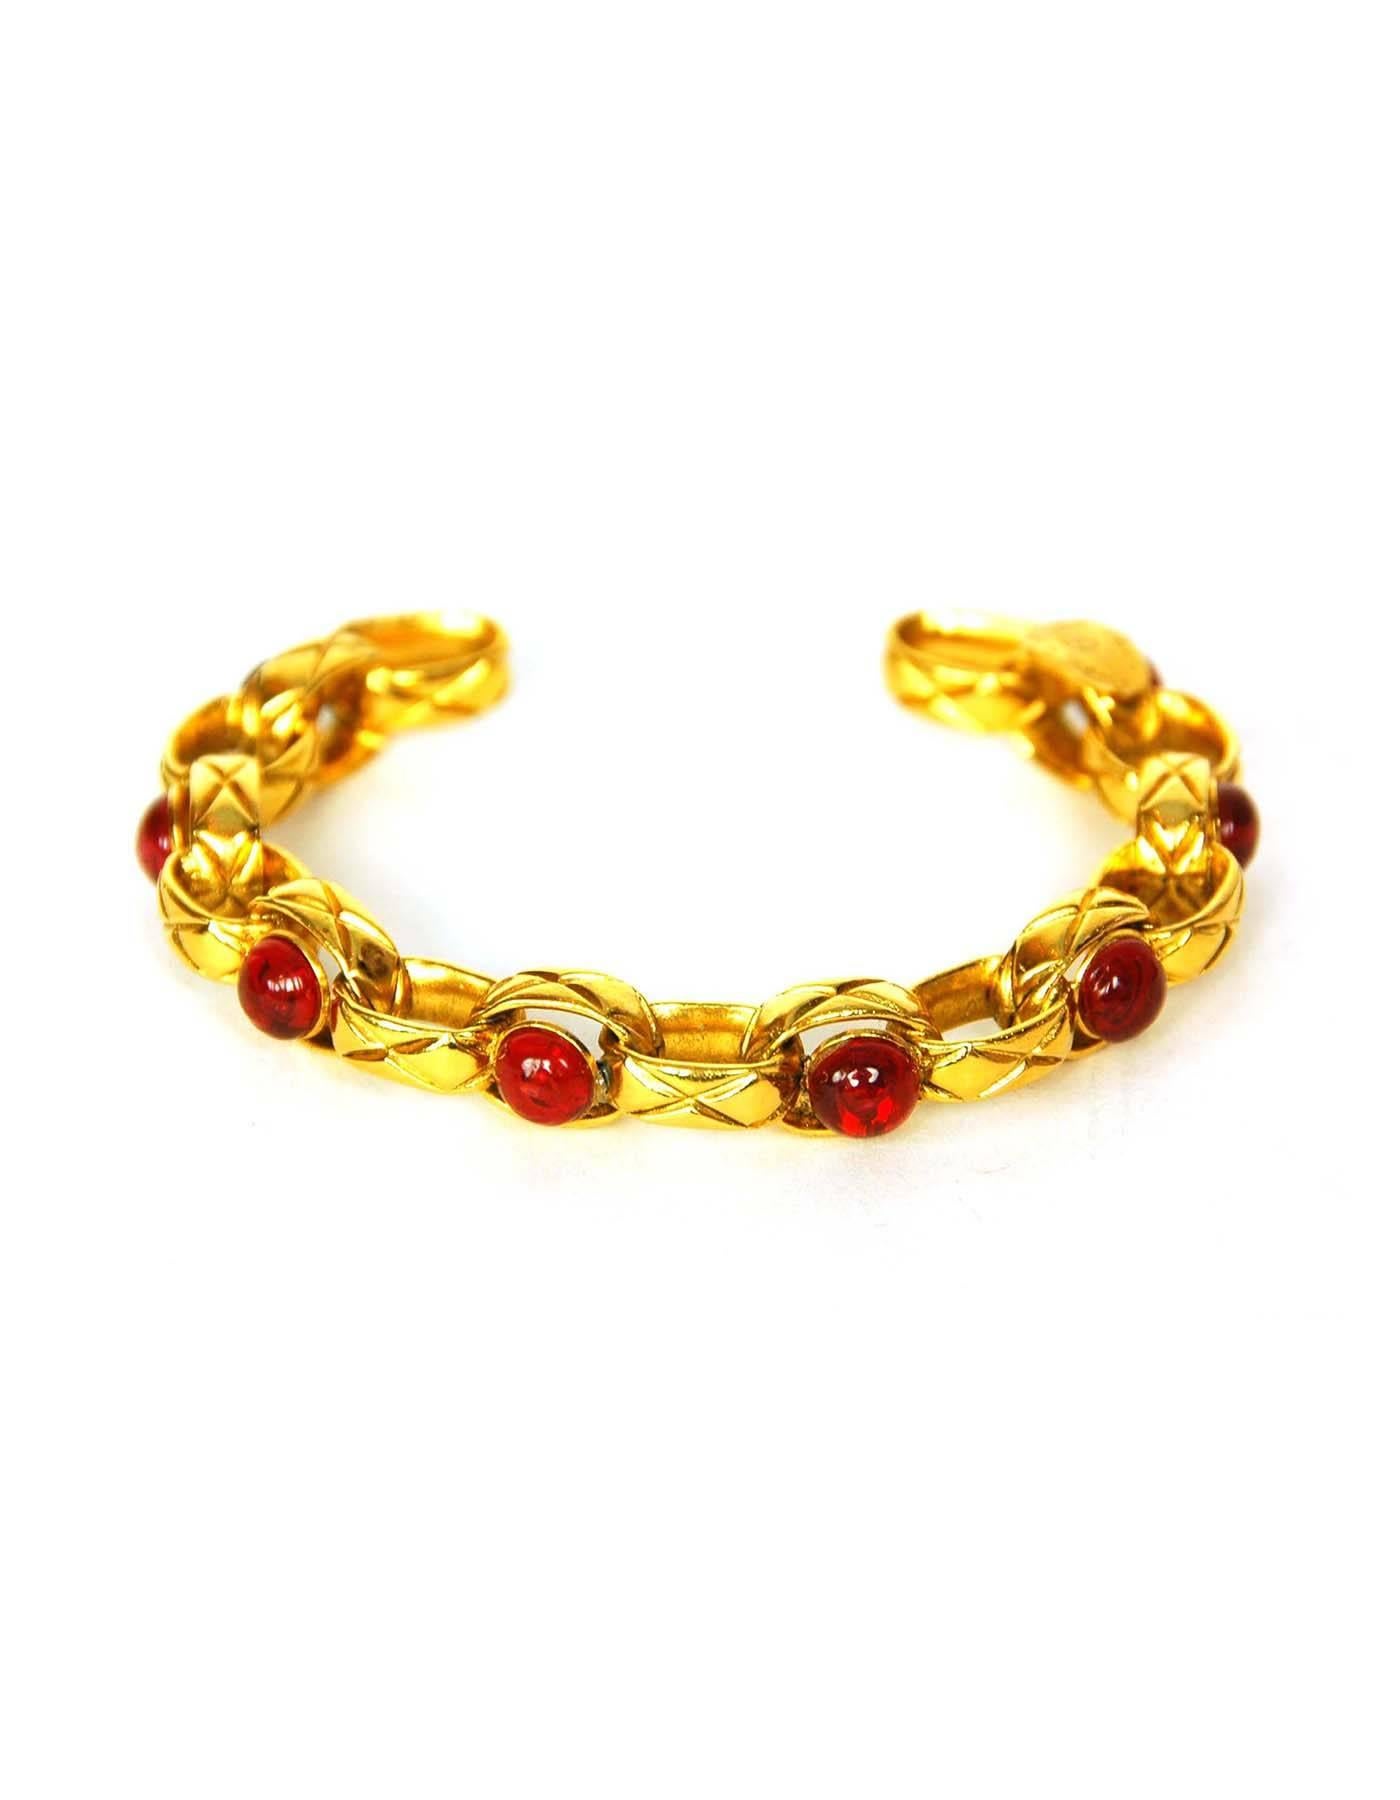 Chanel Vintage '86 Red Gripoix & Gold Cuff Bracelet
Features quilting at goldtone chain links

Made In: France
Year of Production: 1986
Color: Goldtone and red
Materials: Metal and gripoix (poured glass)
Closure: None
Stamp:  2 CC 3
Overall